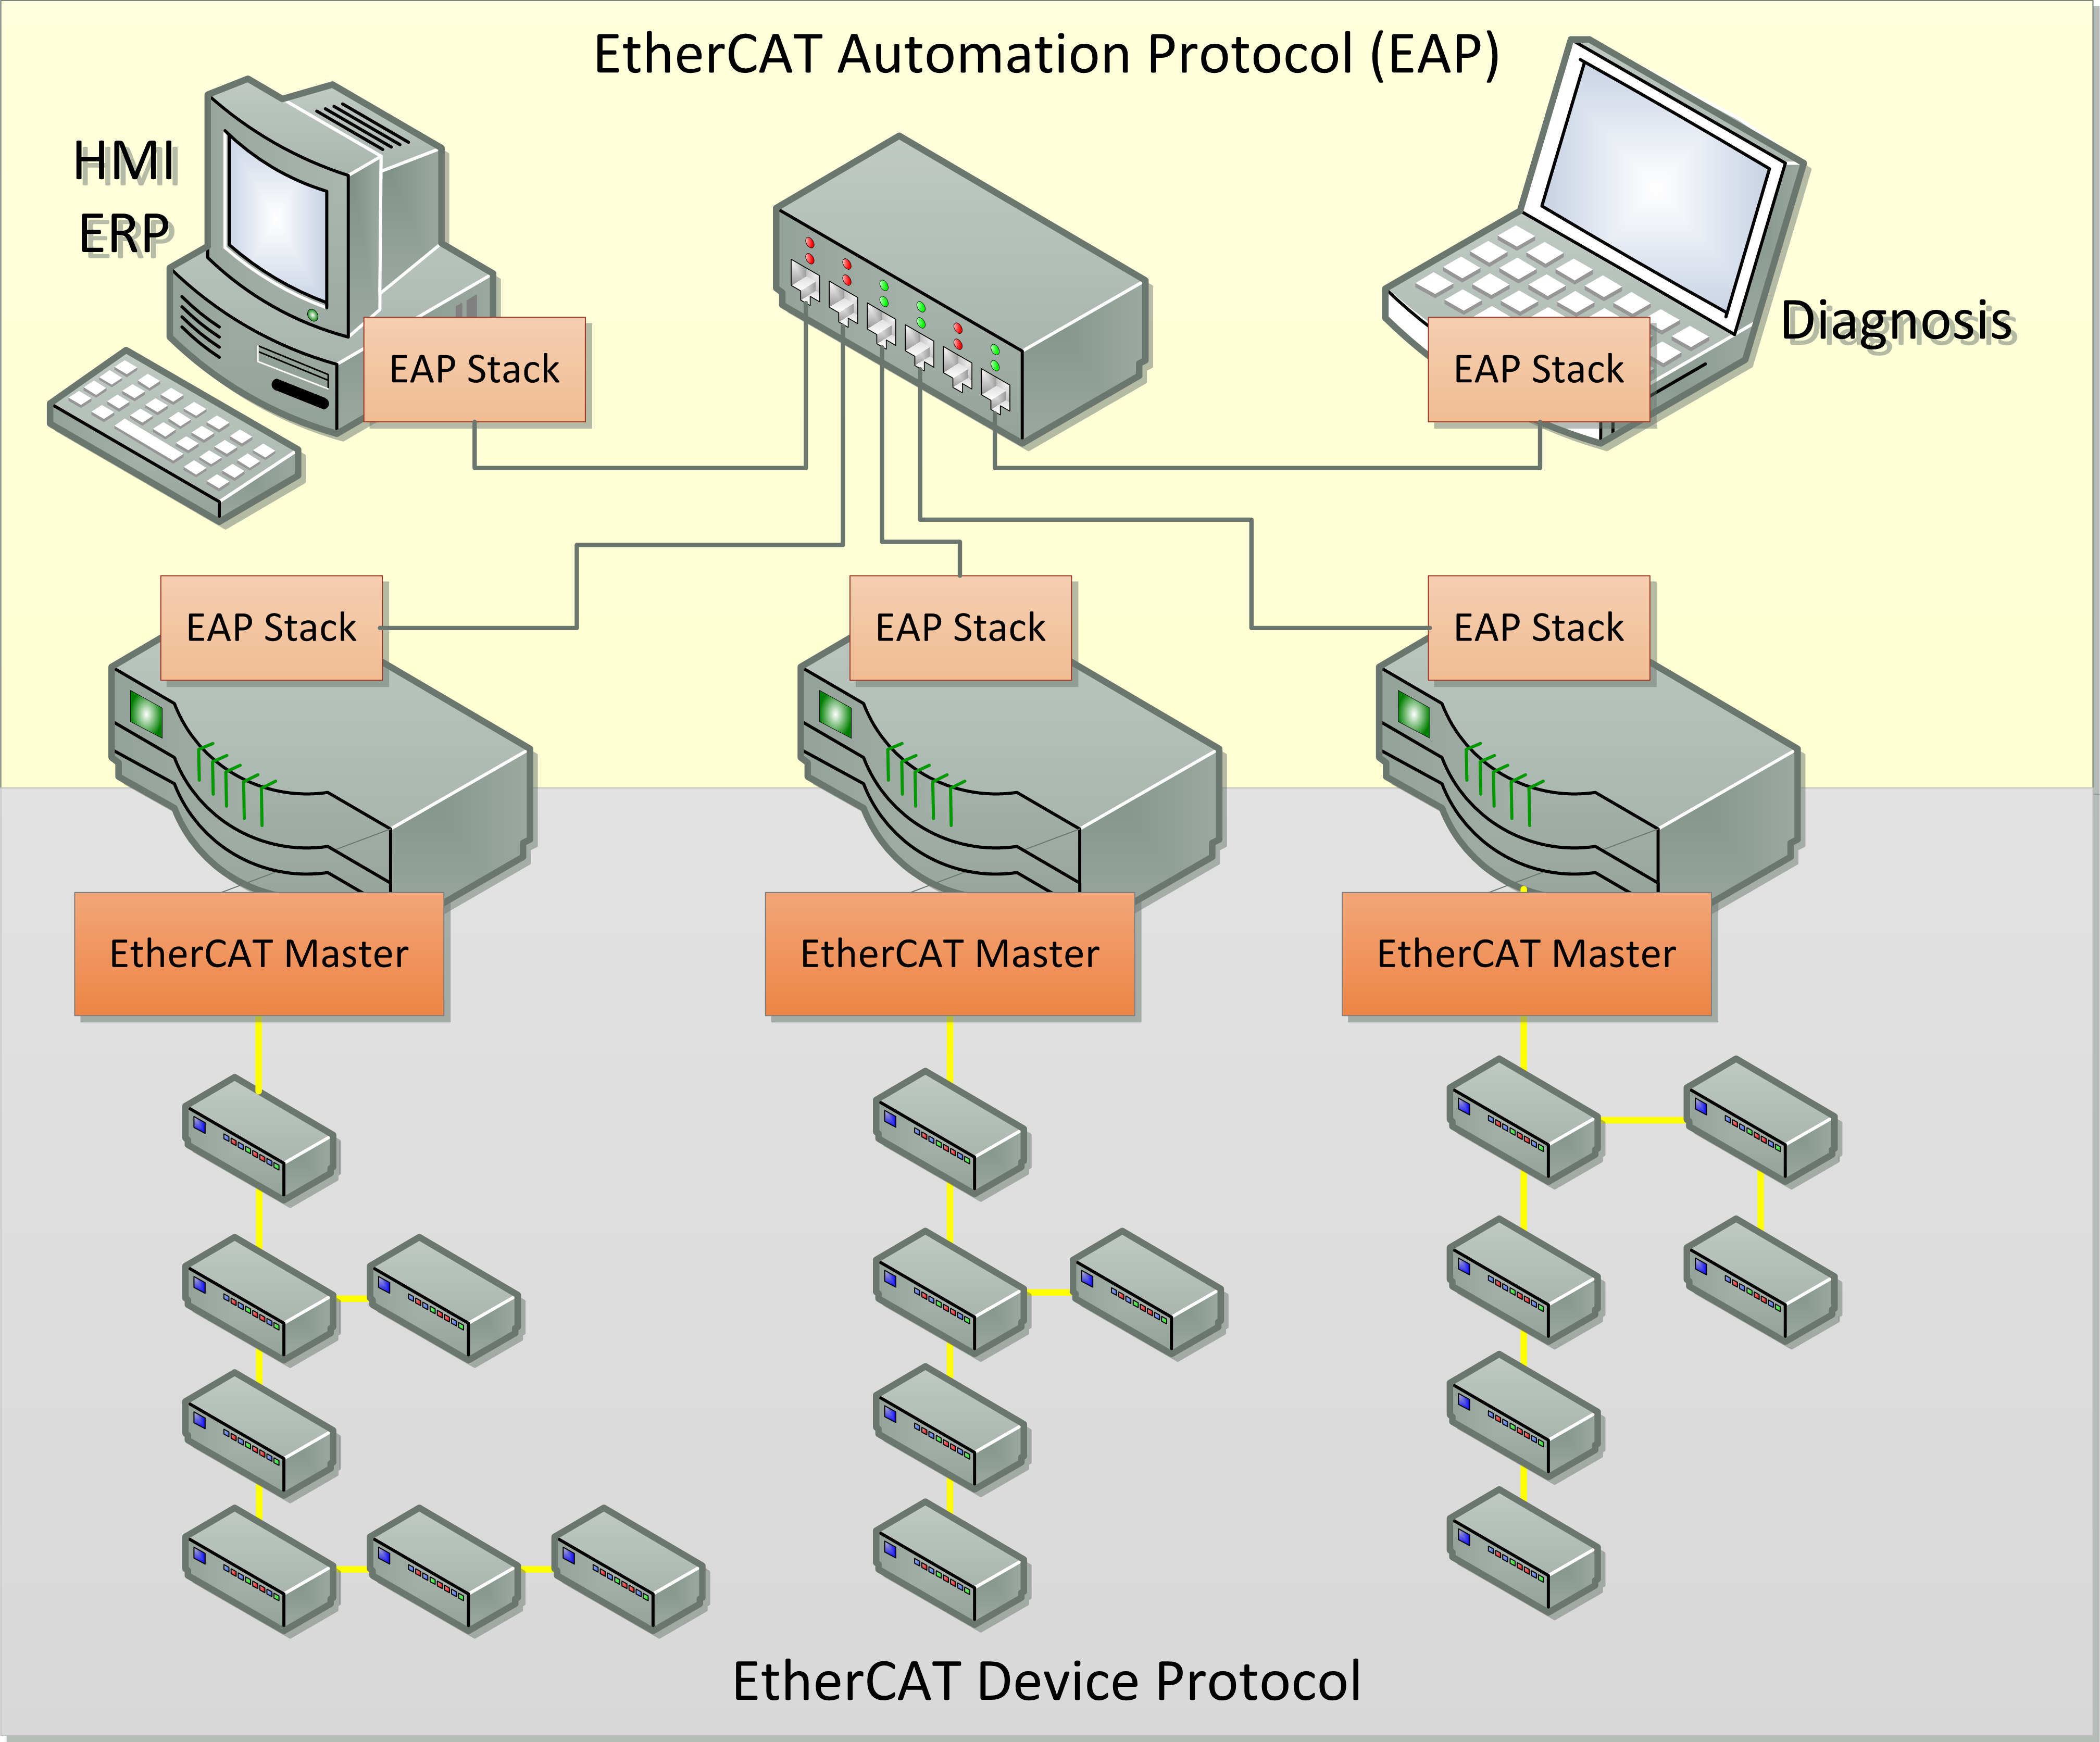 EC-EAP Stack: System-wide communication with the EtherCAT Automation Protocol (EAP)